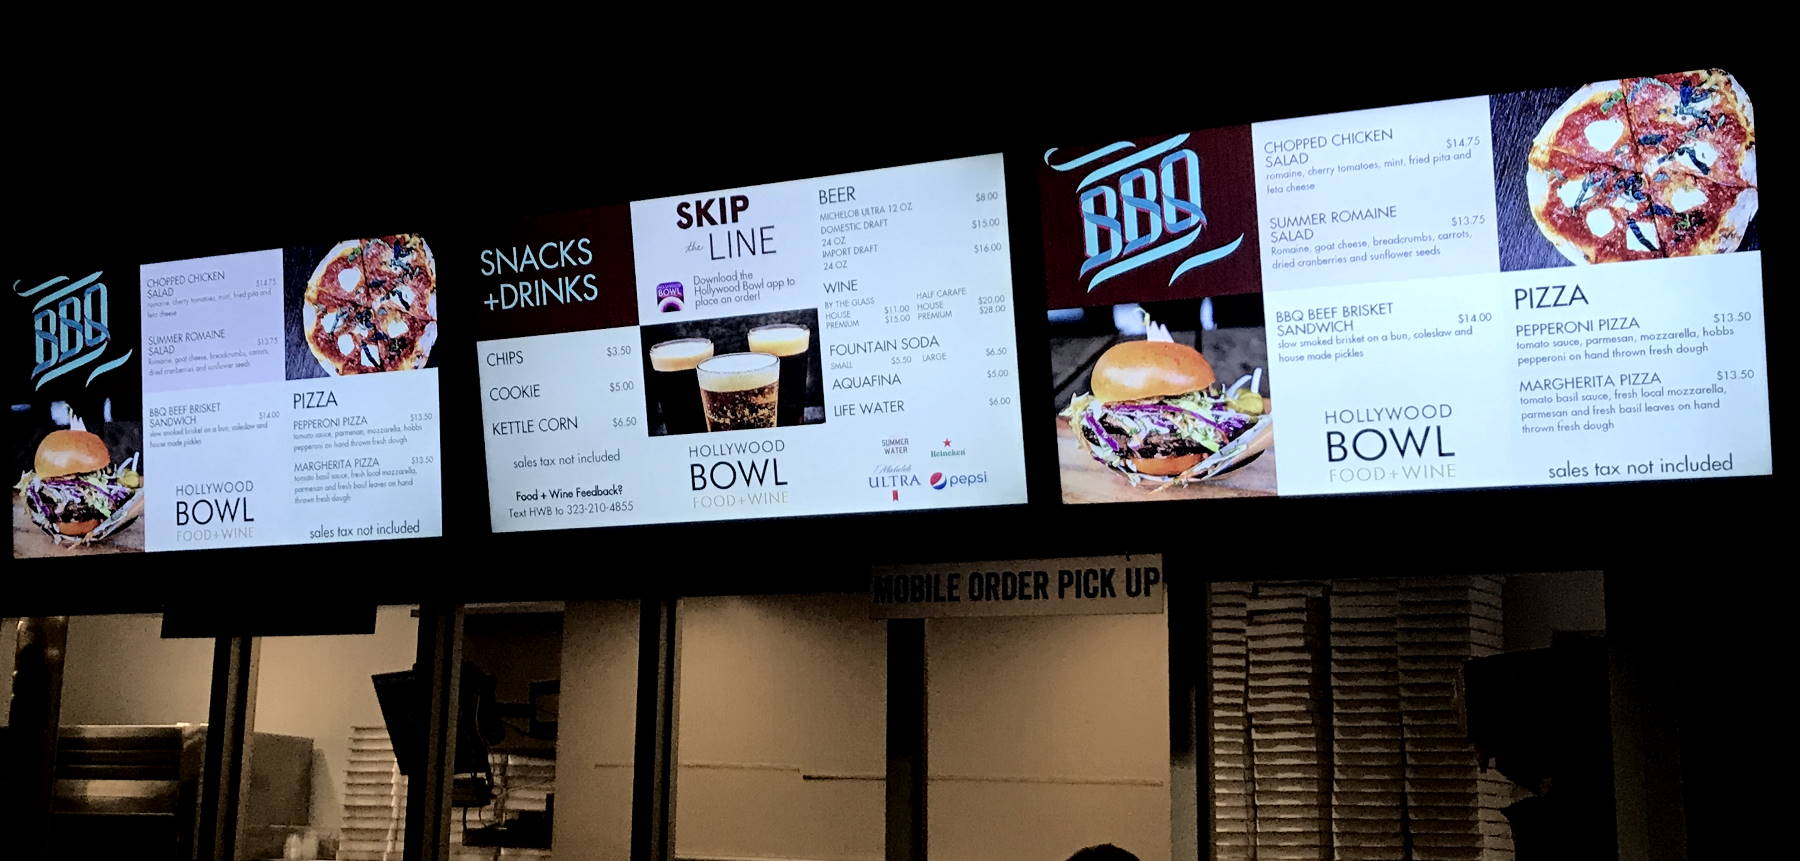 Some food options at the Hollywood Bowl